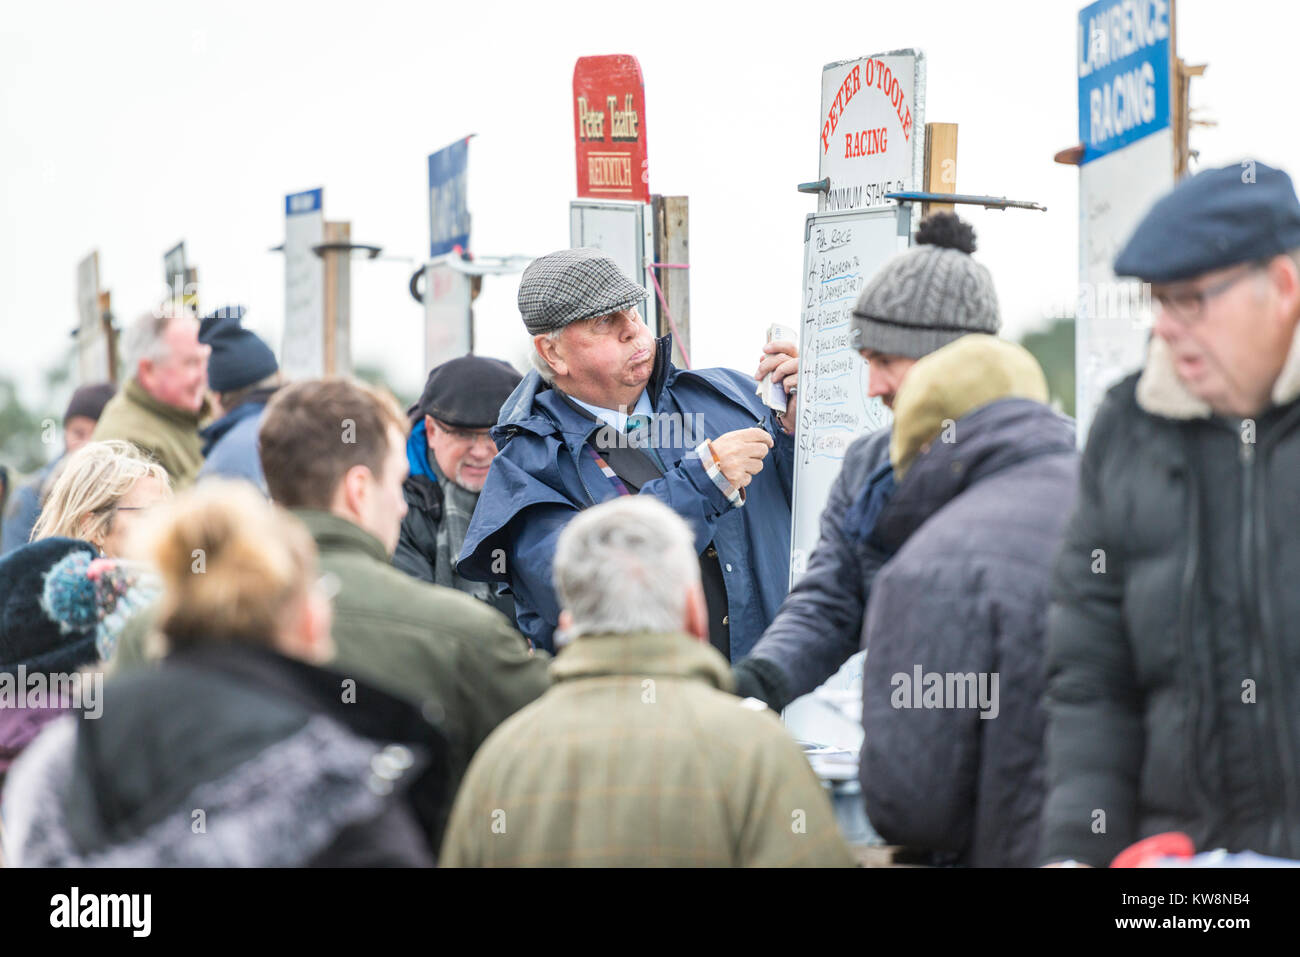 Cambridgeshire, UK. 31st December, 2017. Cottenham, Cambridgeshire UK 31st December 2017.   A bookie writes the odds at the Cambridgeshire Harriers Hunt Club Point-to-Point Races.  The small, rural racecourse holds the traditional New Year’s Eve meeting each year where riders compete in horse racing over hurdles on hunting horses. Credit: Julian Eales/Alamy Live News Stock Photo